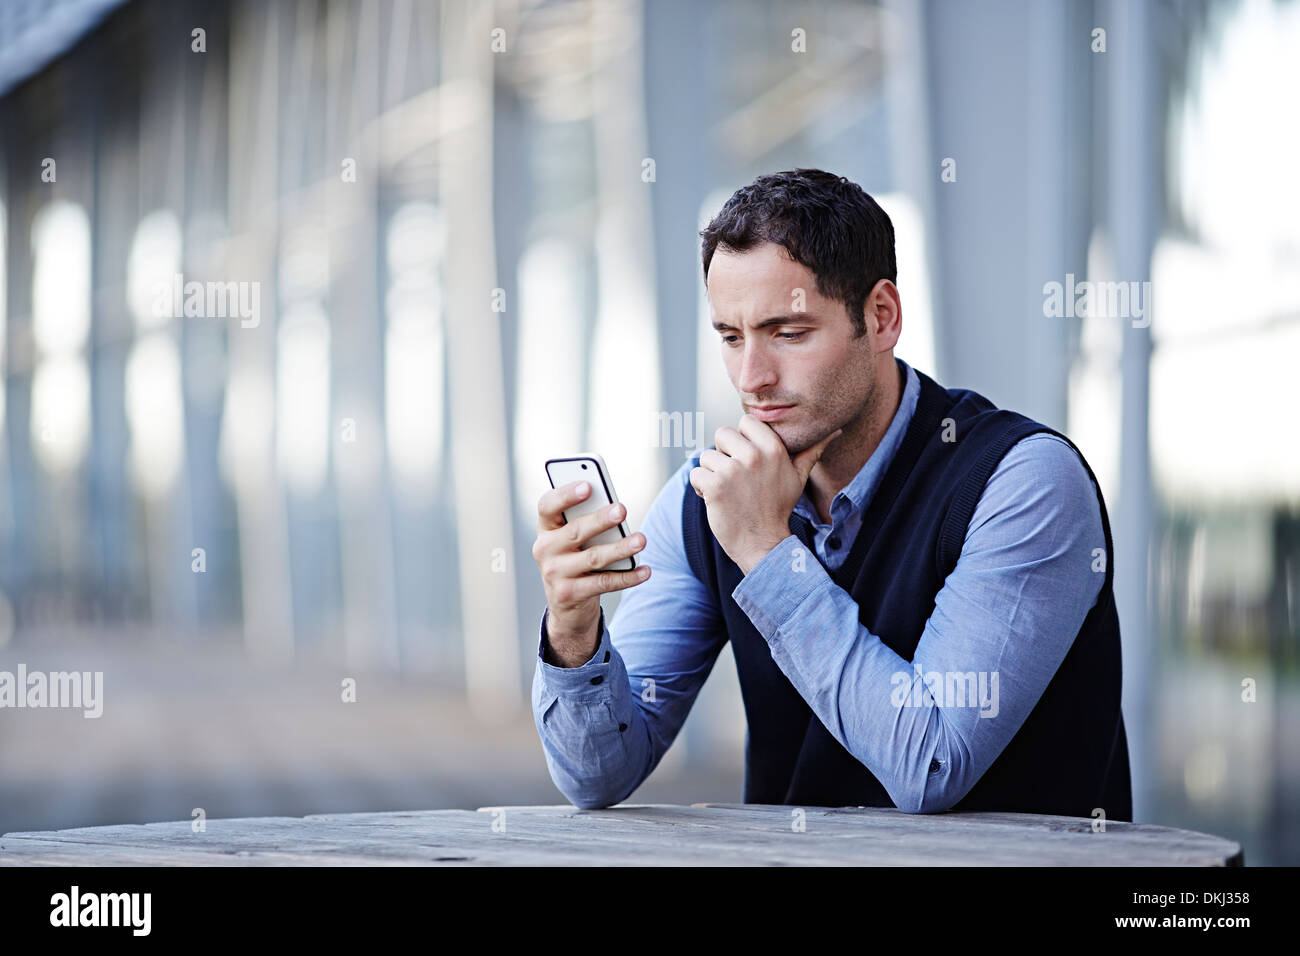 Businessman using cell phone Banque D'Images